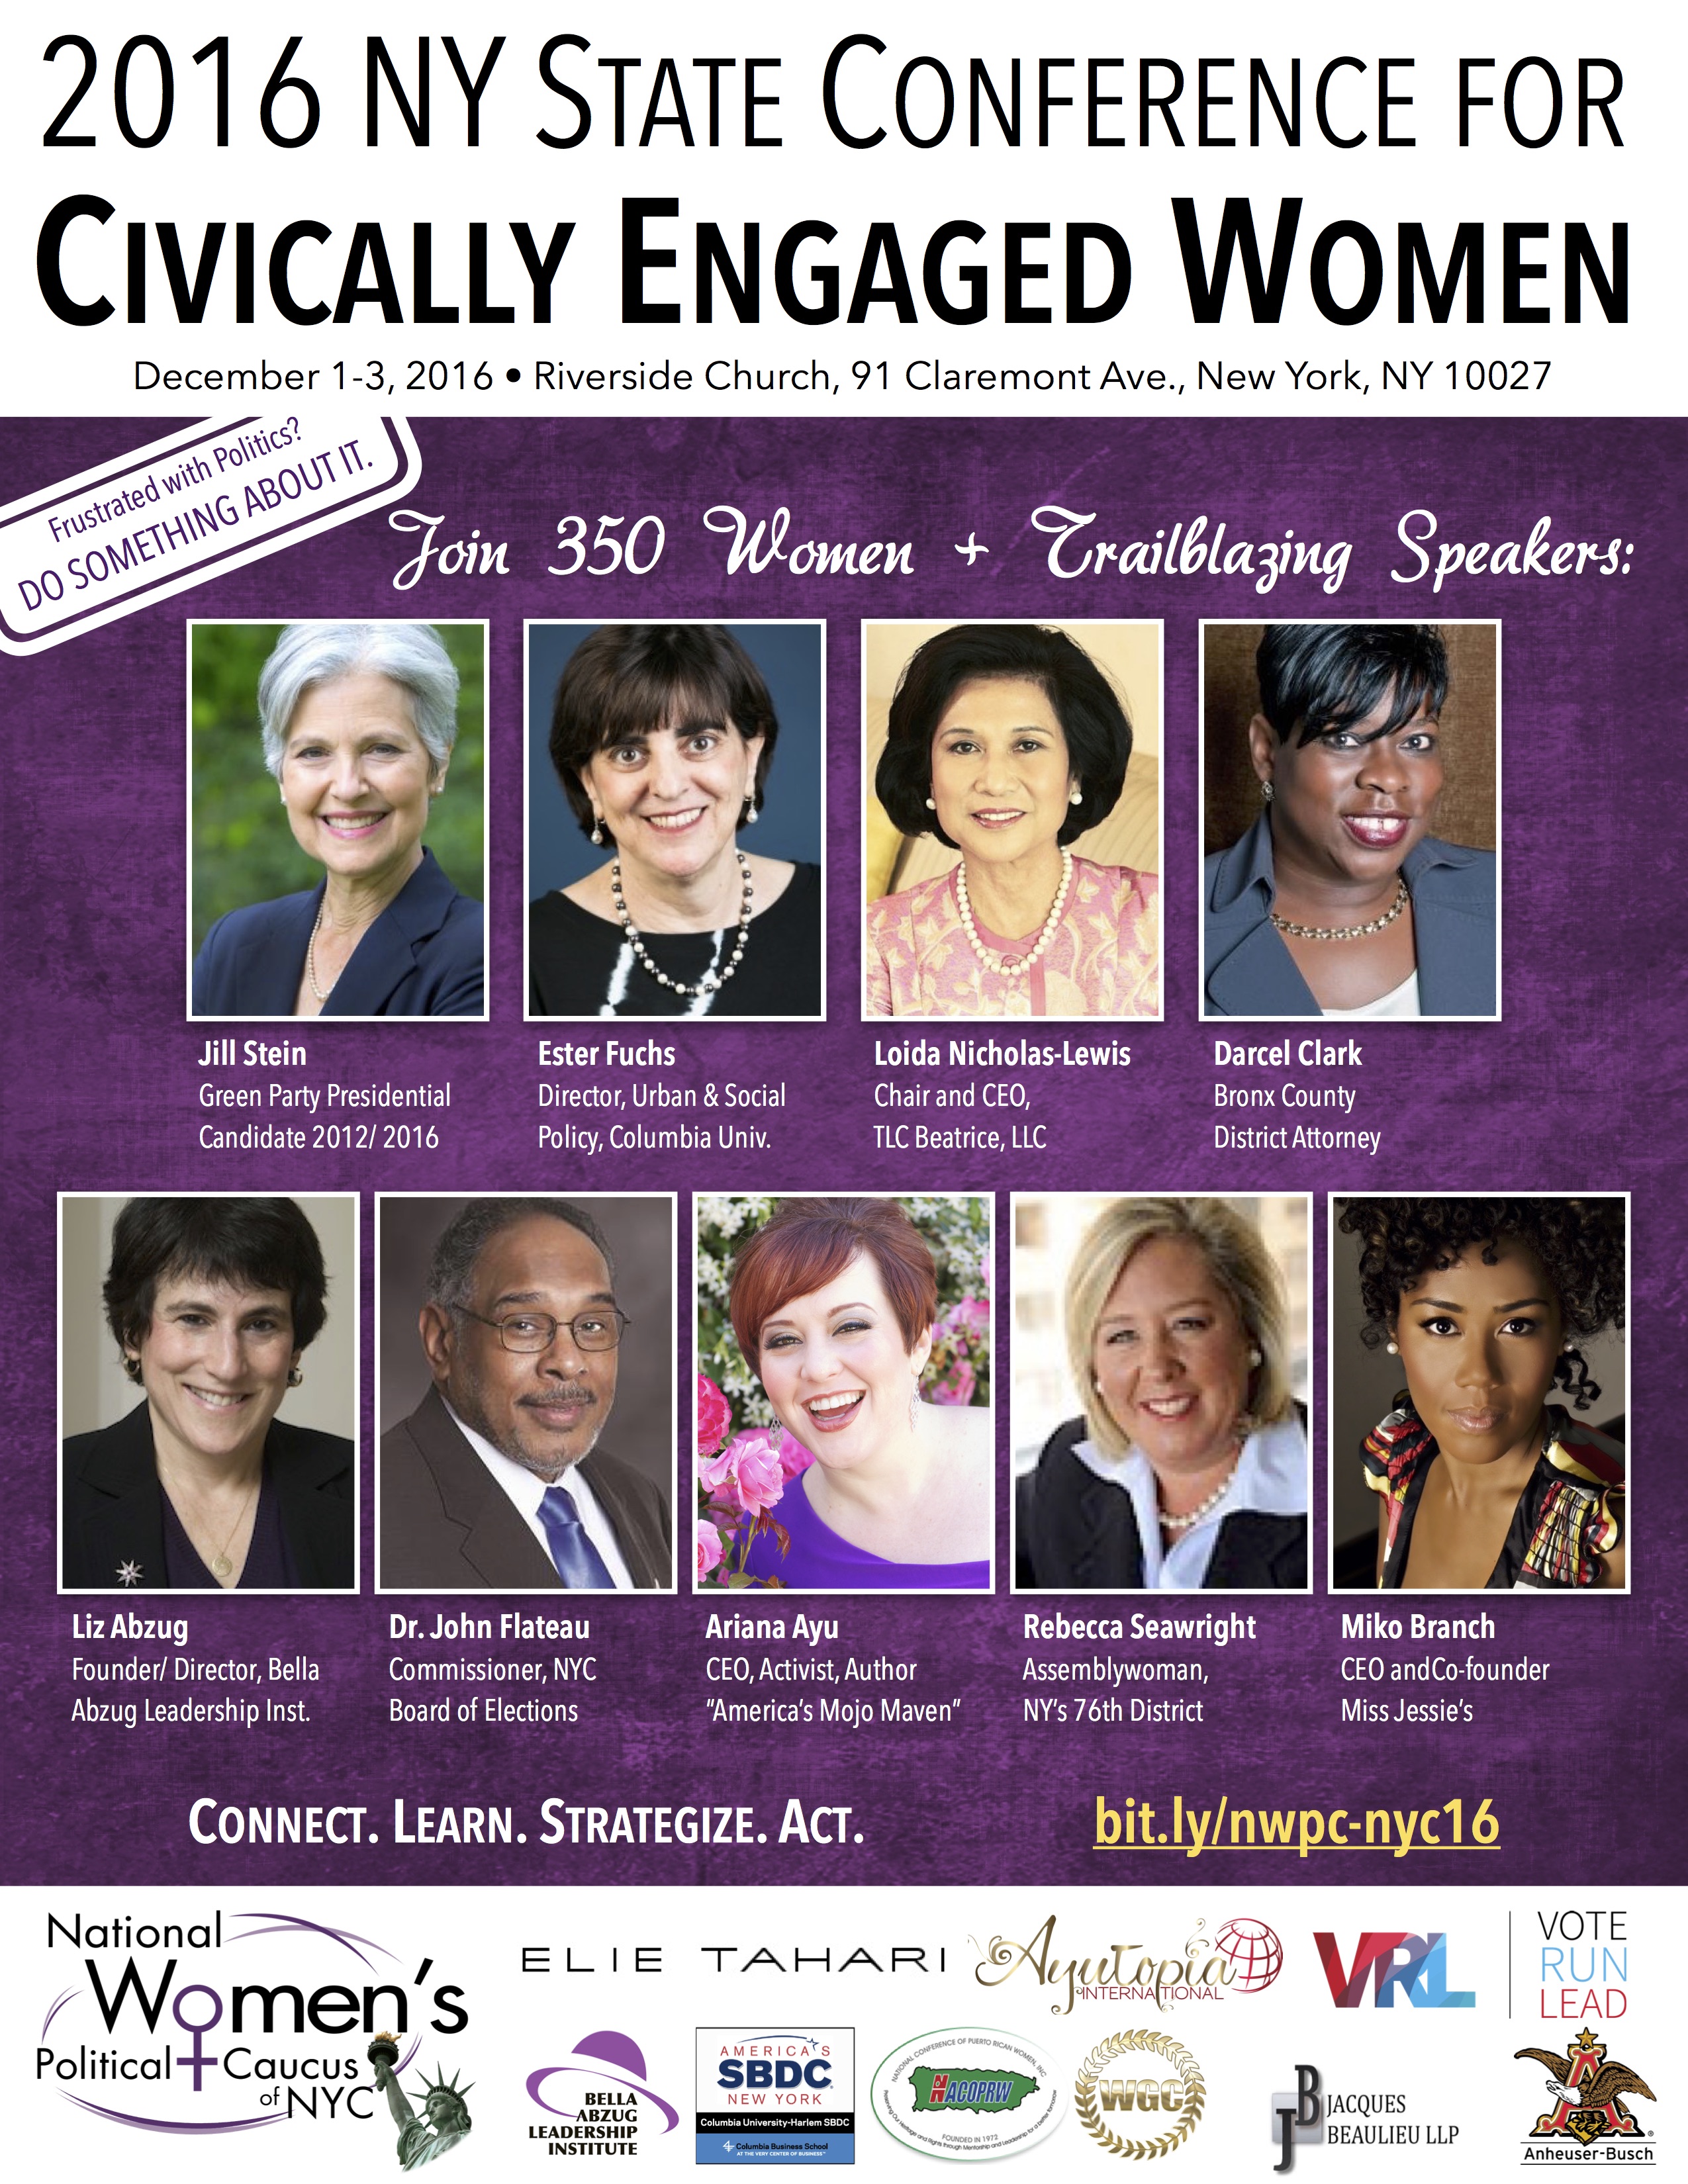 2016 NYS Convention for Civically Engaged Women